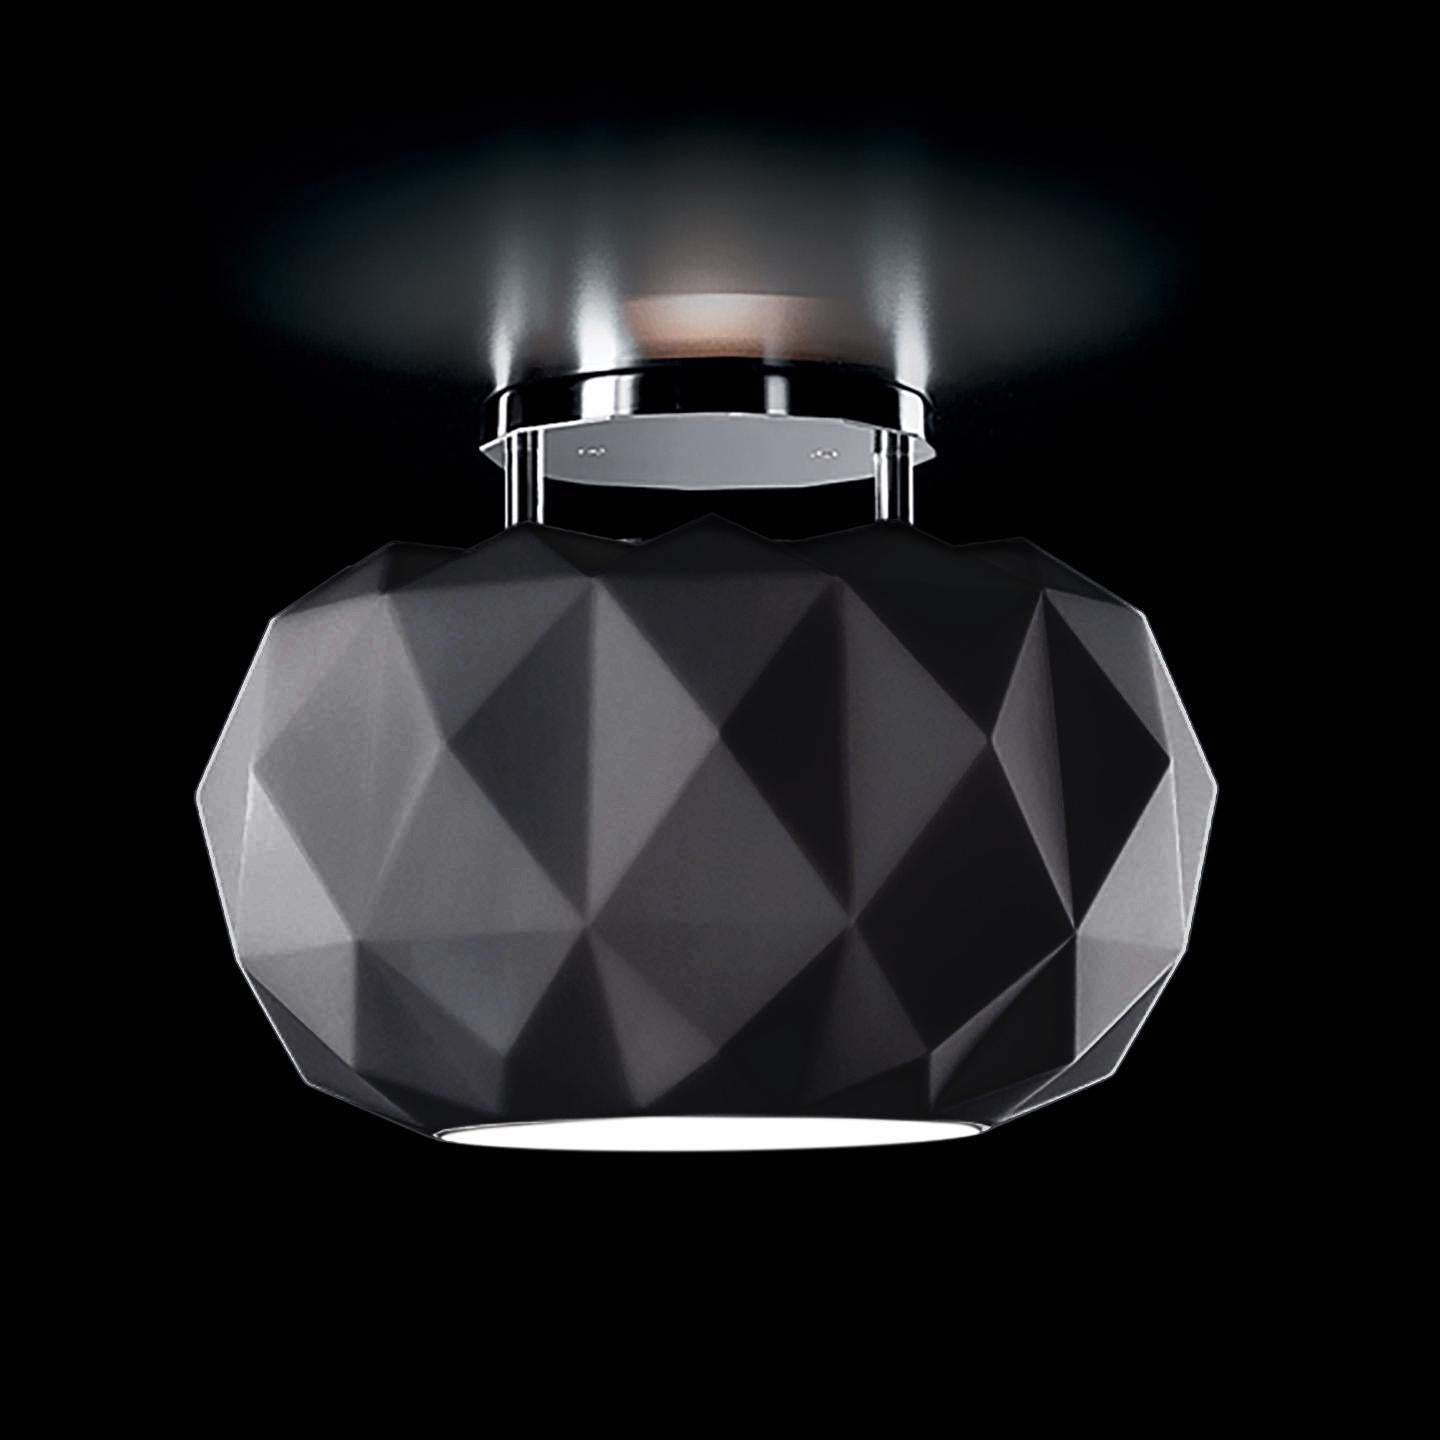 Leucos Deluxe PL 35 Flush Mount in Matte Black and Chrome by Archirivolto